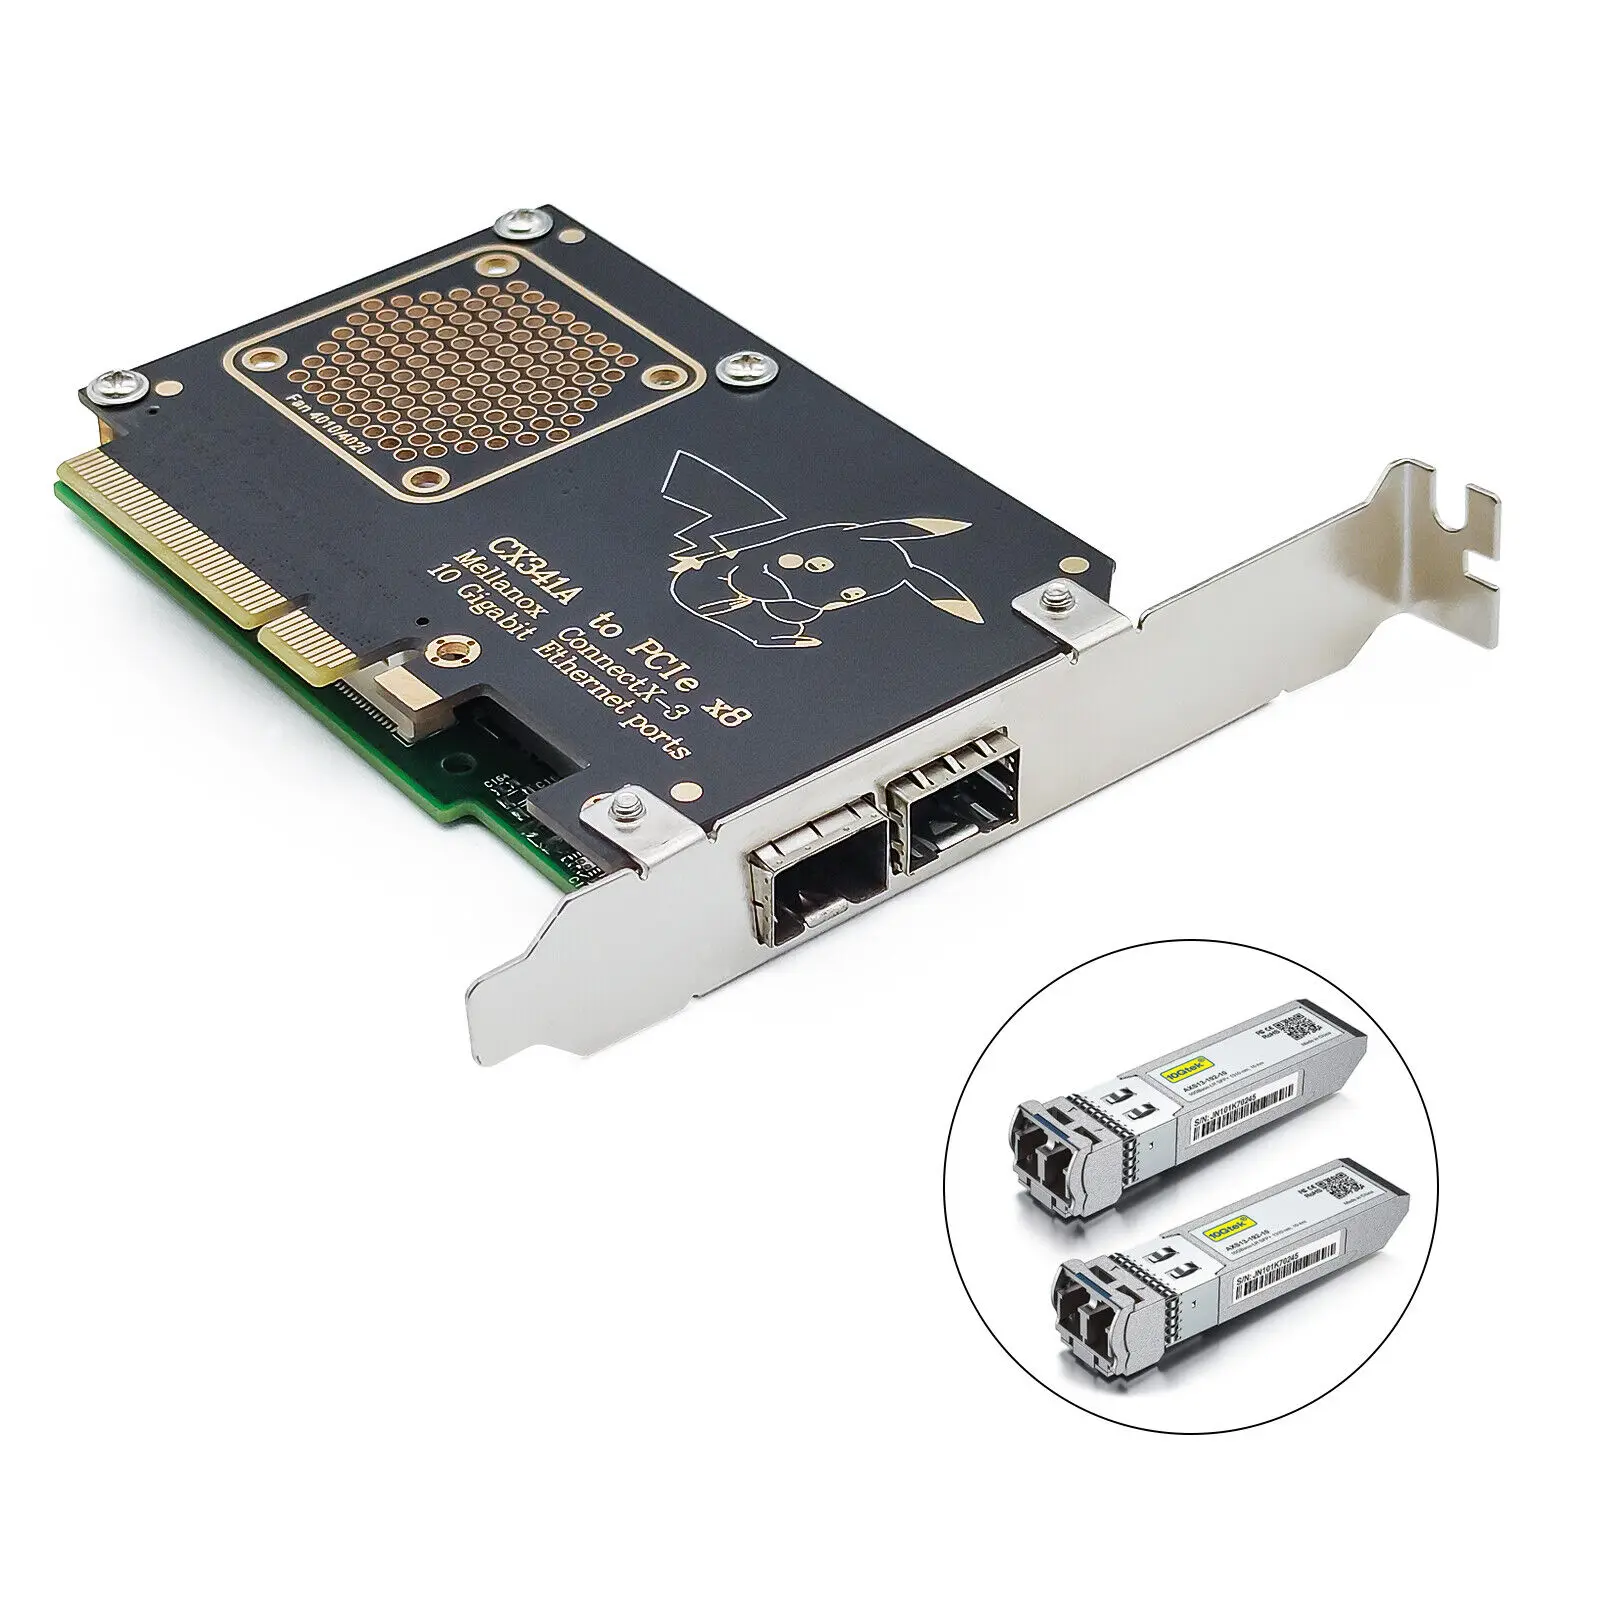 PCIe x8 Adapter with OCP Network Card CX342A and 2 pcs SFP 10G LR Modules